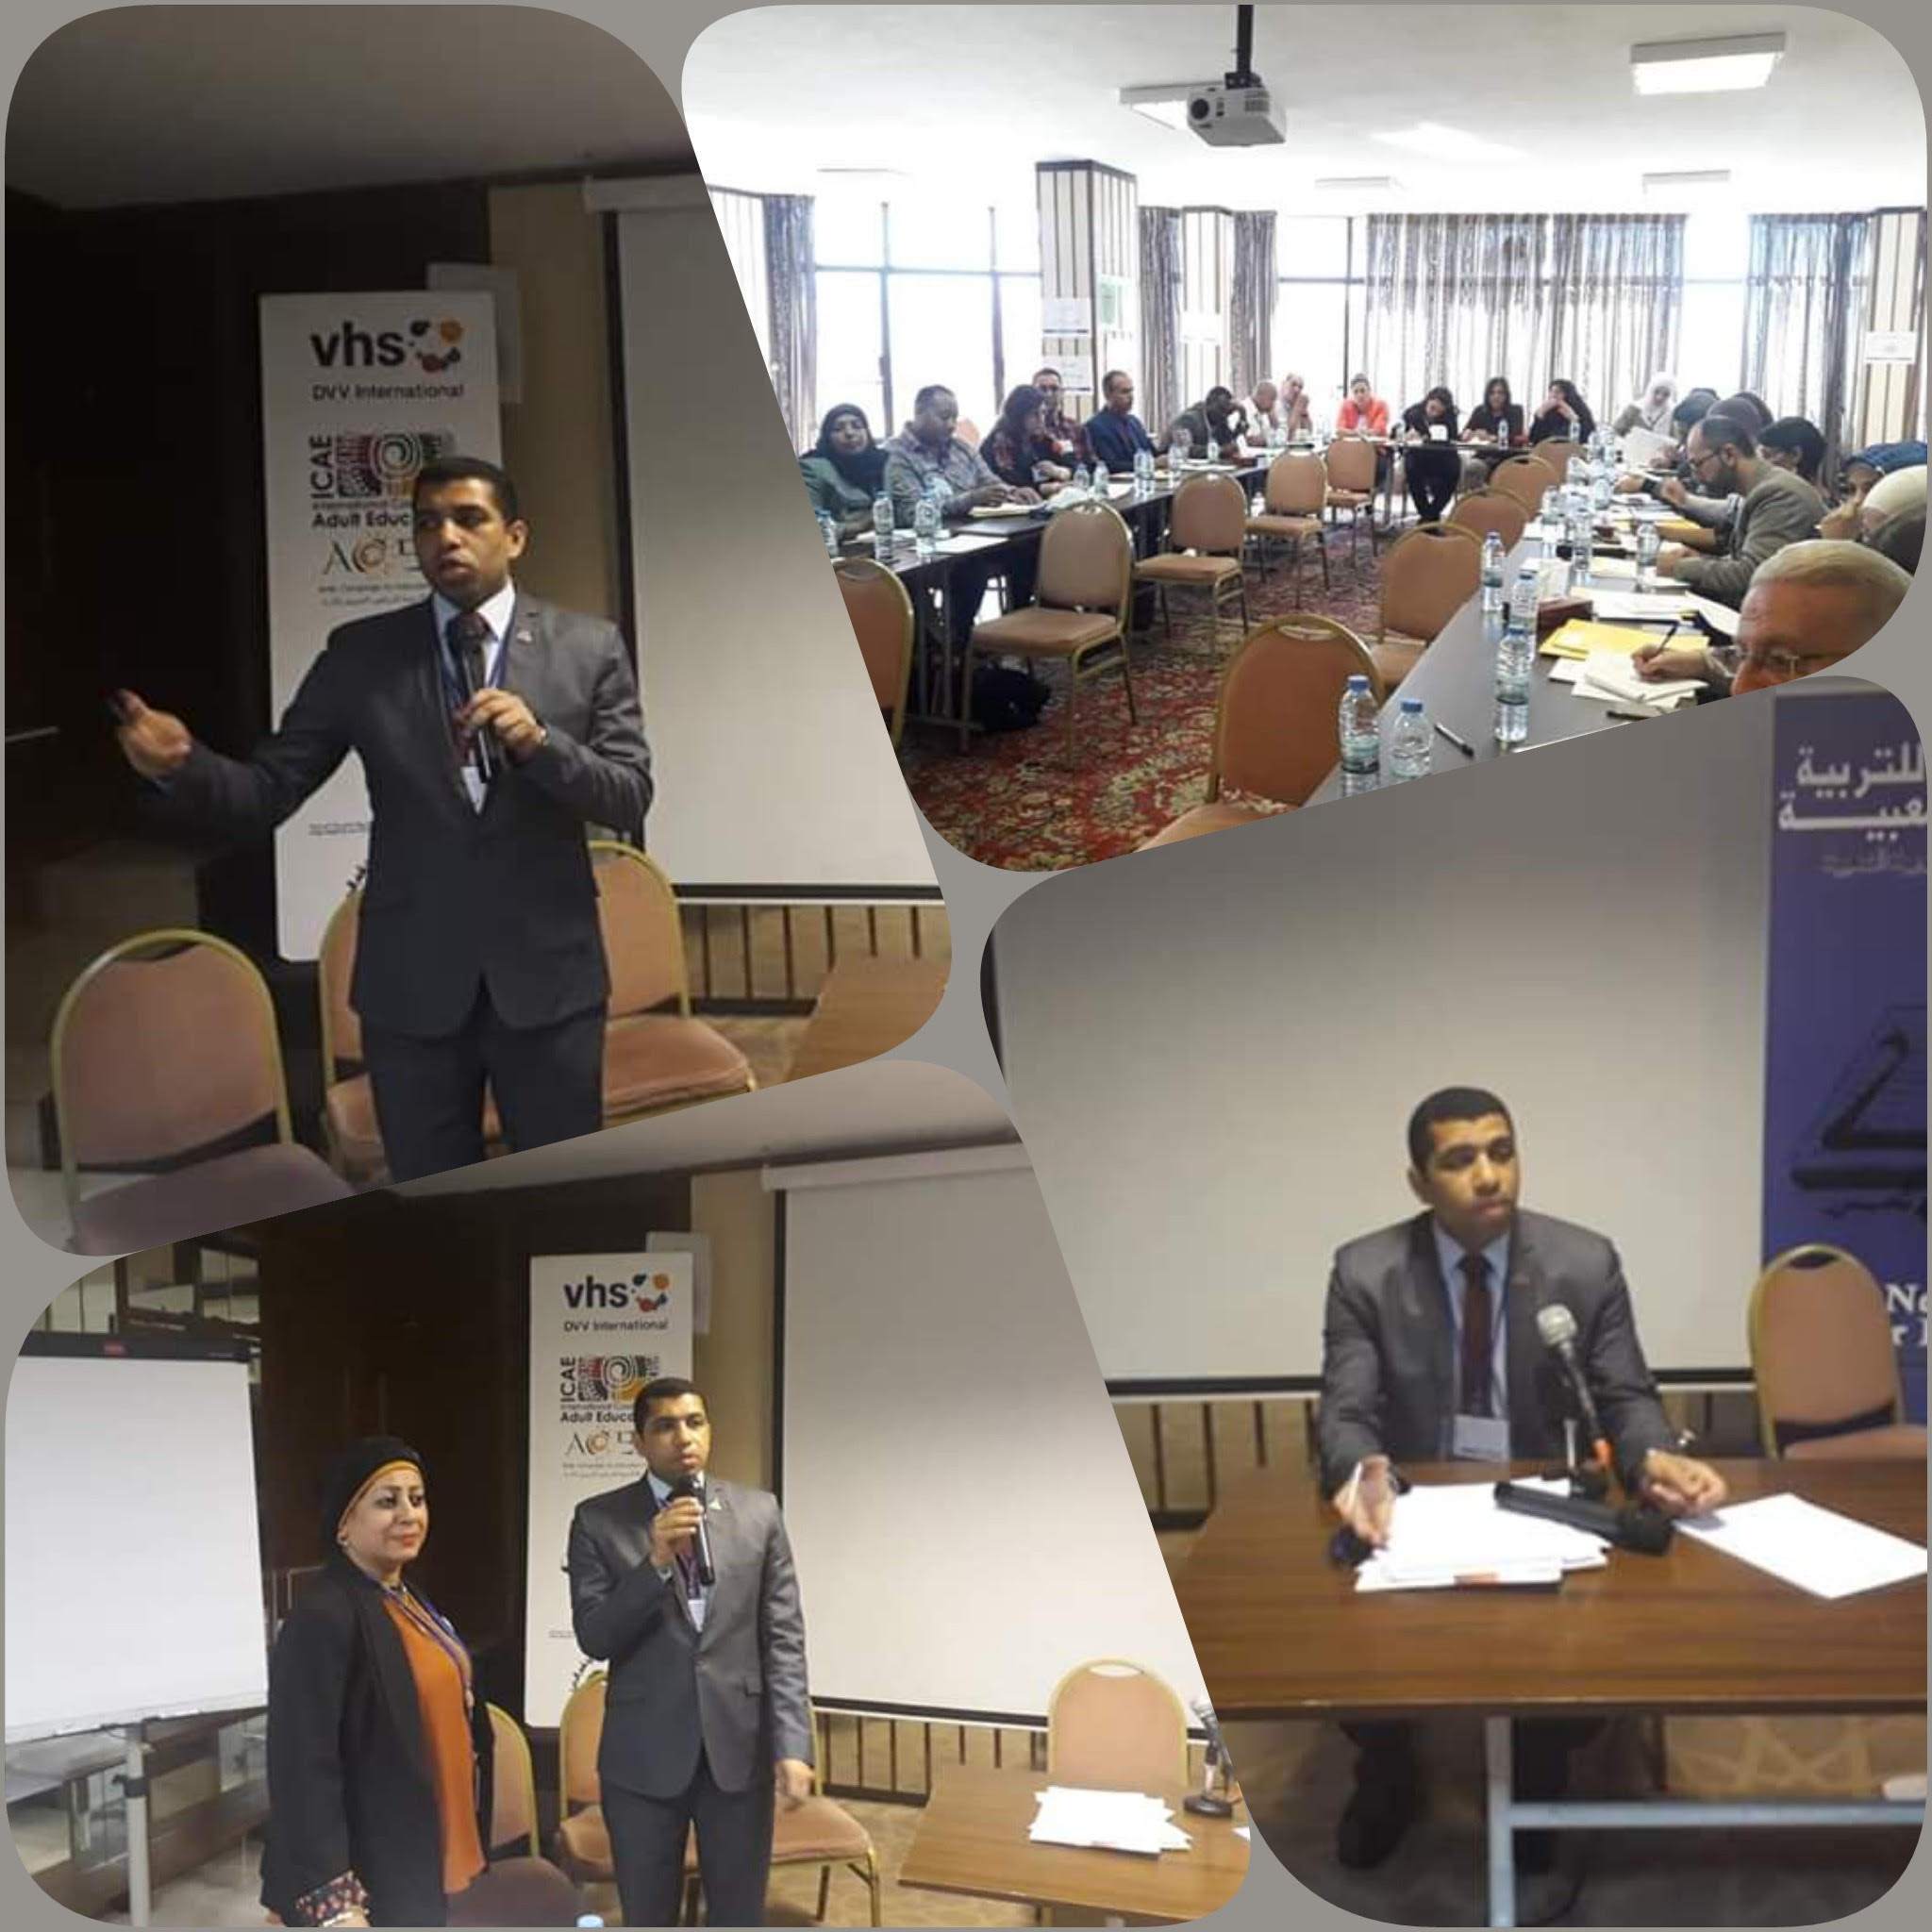 The Center of Adult Education participates in a workshop in Lebanon